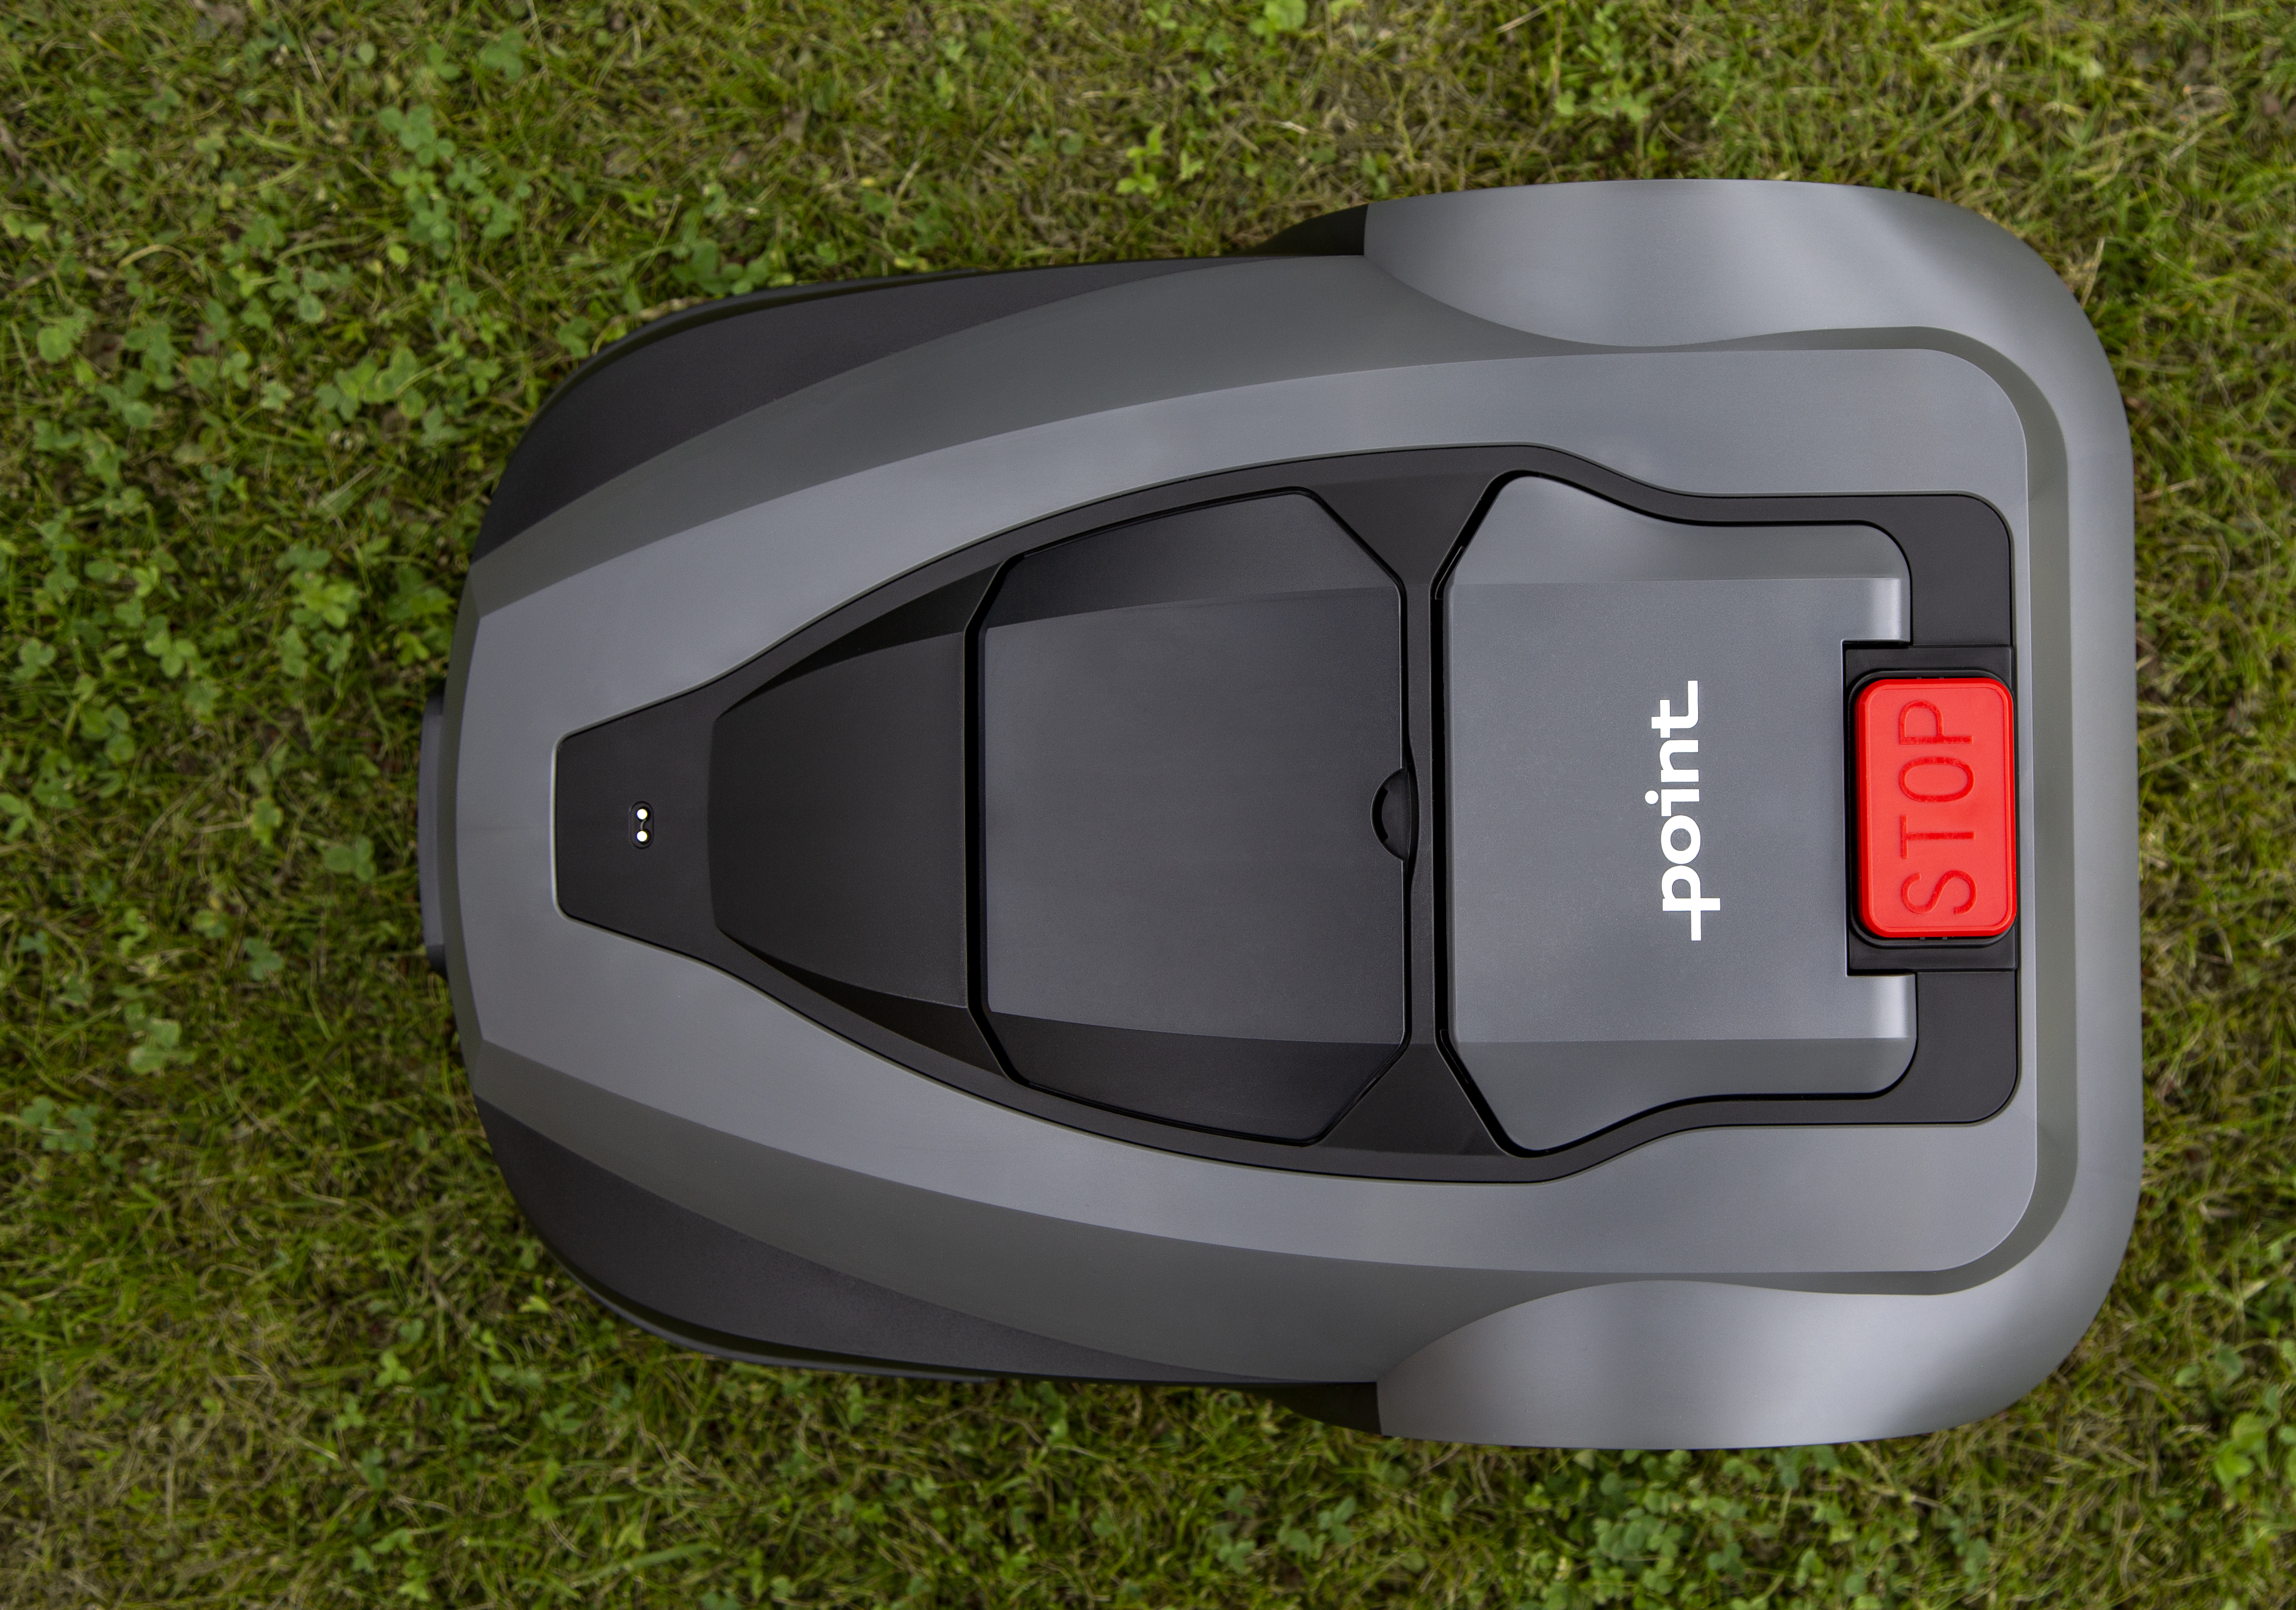 Robot lawn mower from top